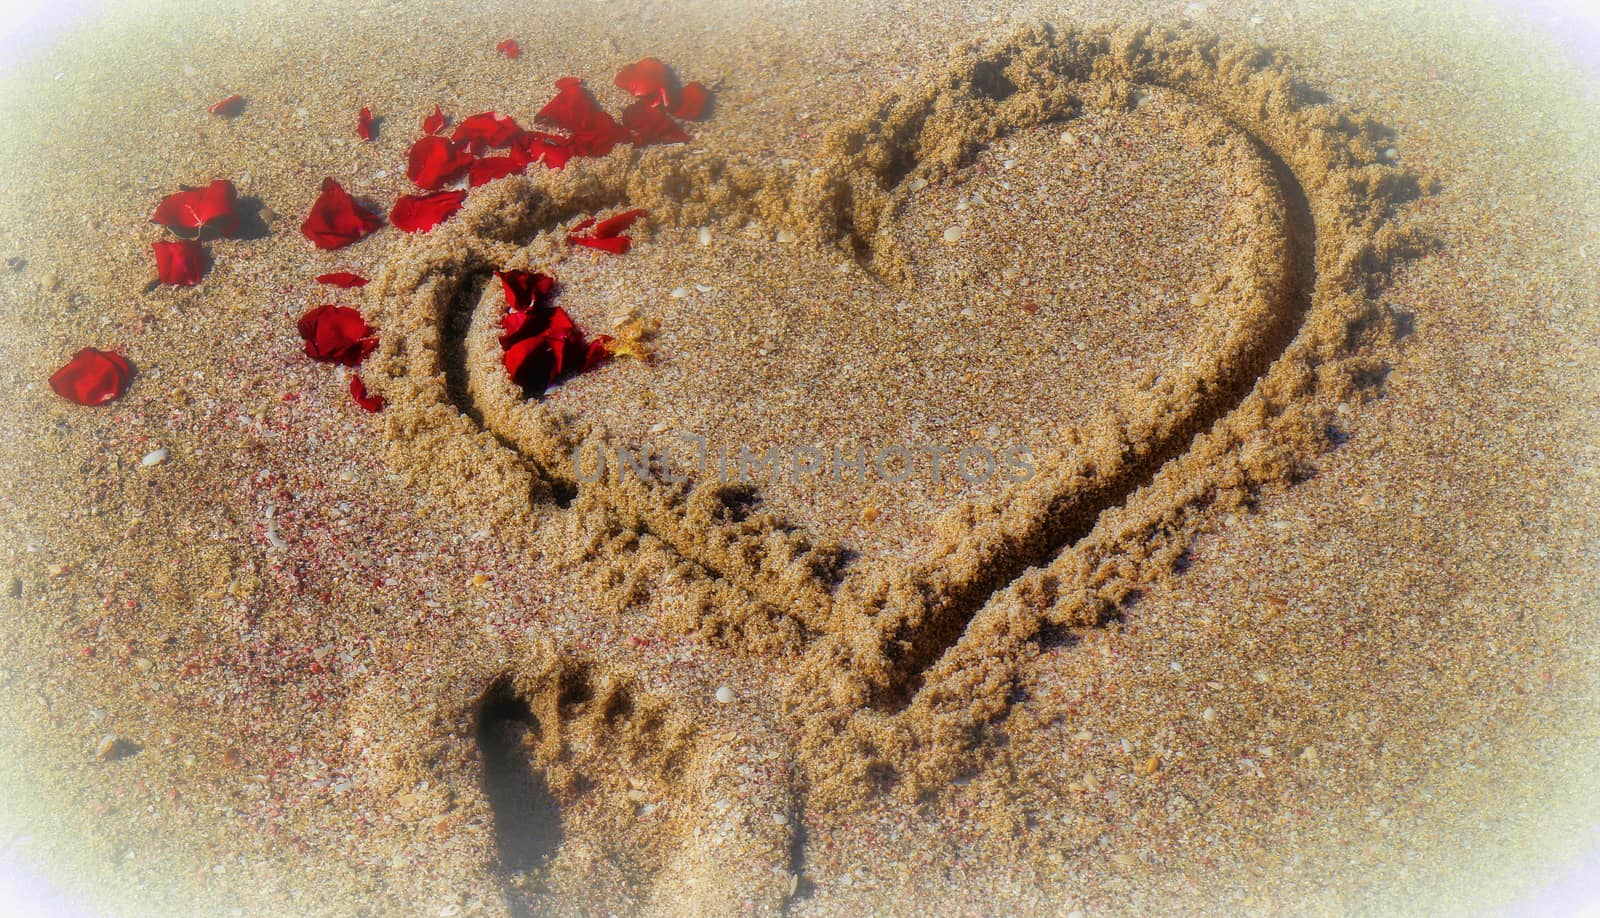 Heart in the sand with scattered sheets of a rose. Beach in Oman by geogif